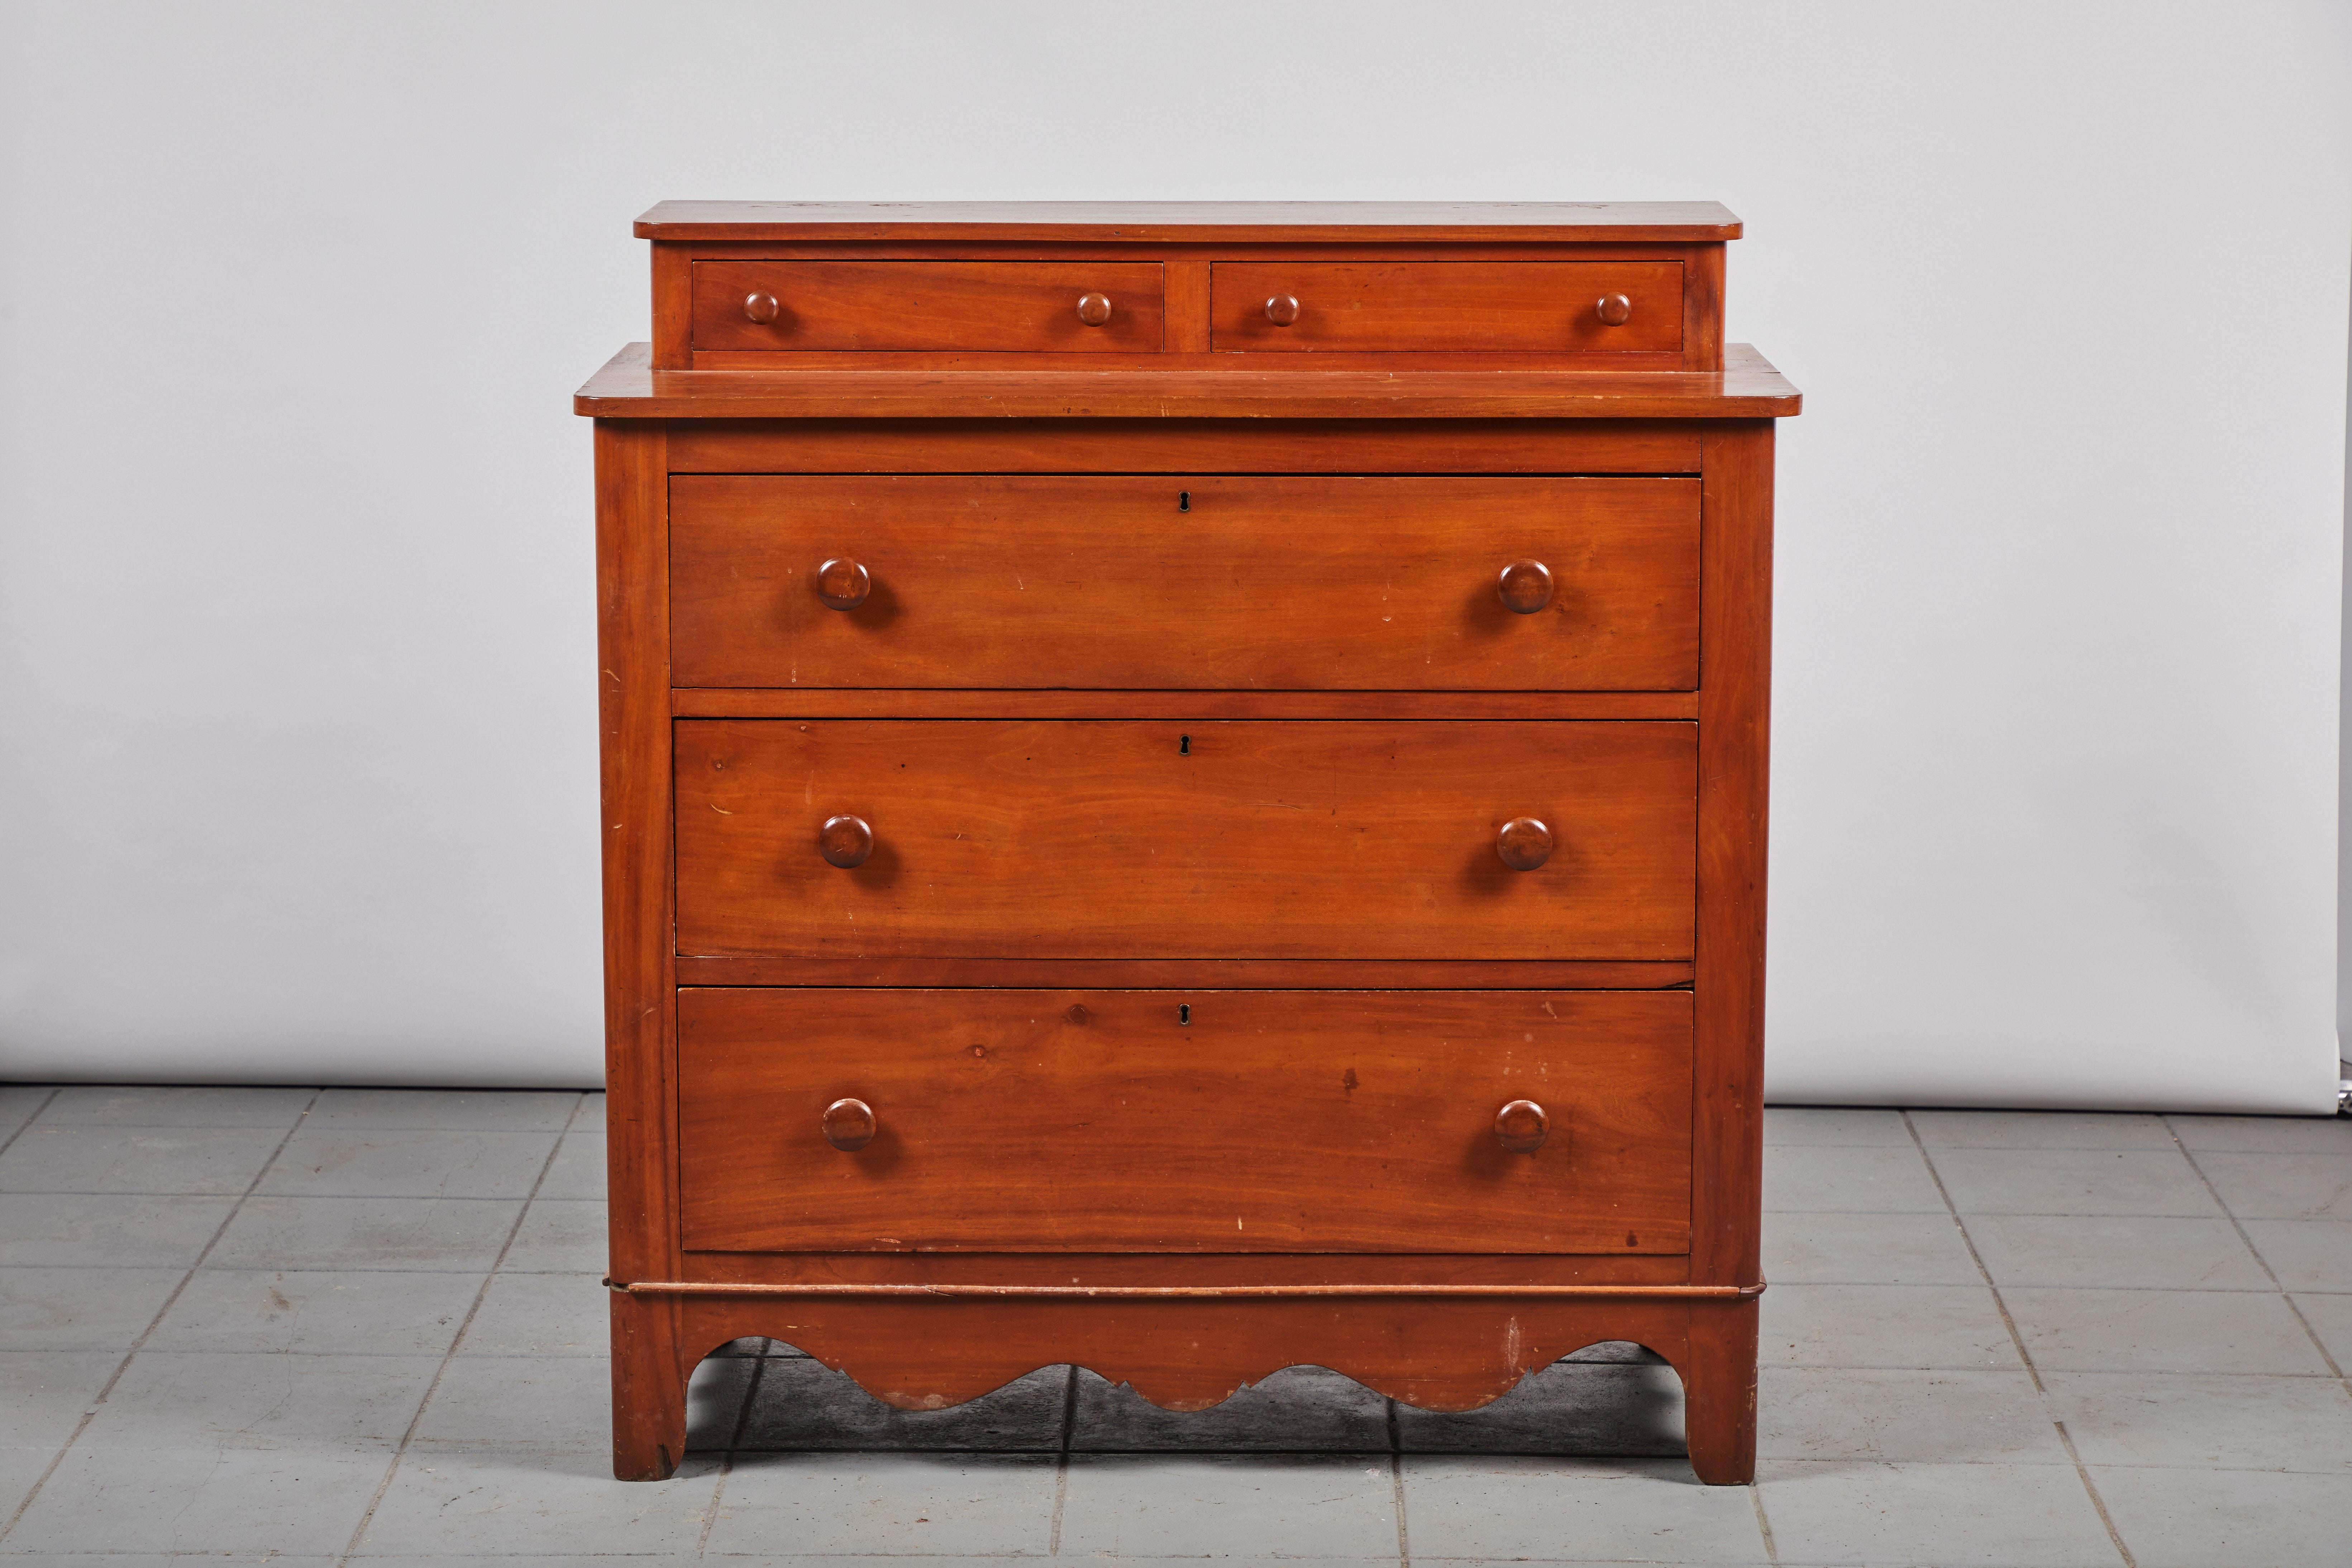 Early American five-drawer dresser, this dresser offers three lower wide drawers with two small petite vanity drawers on top.